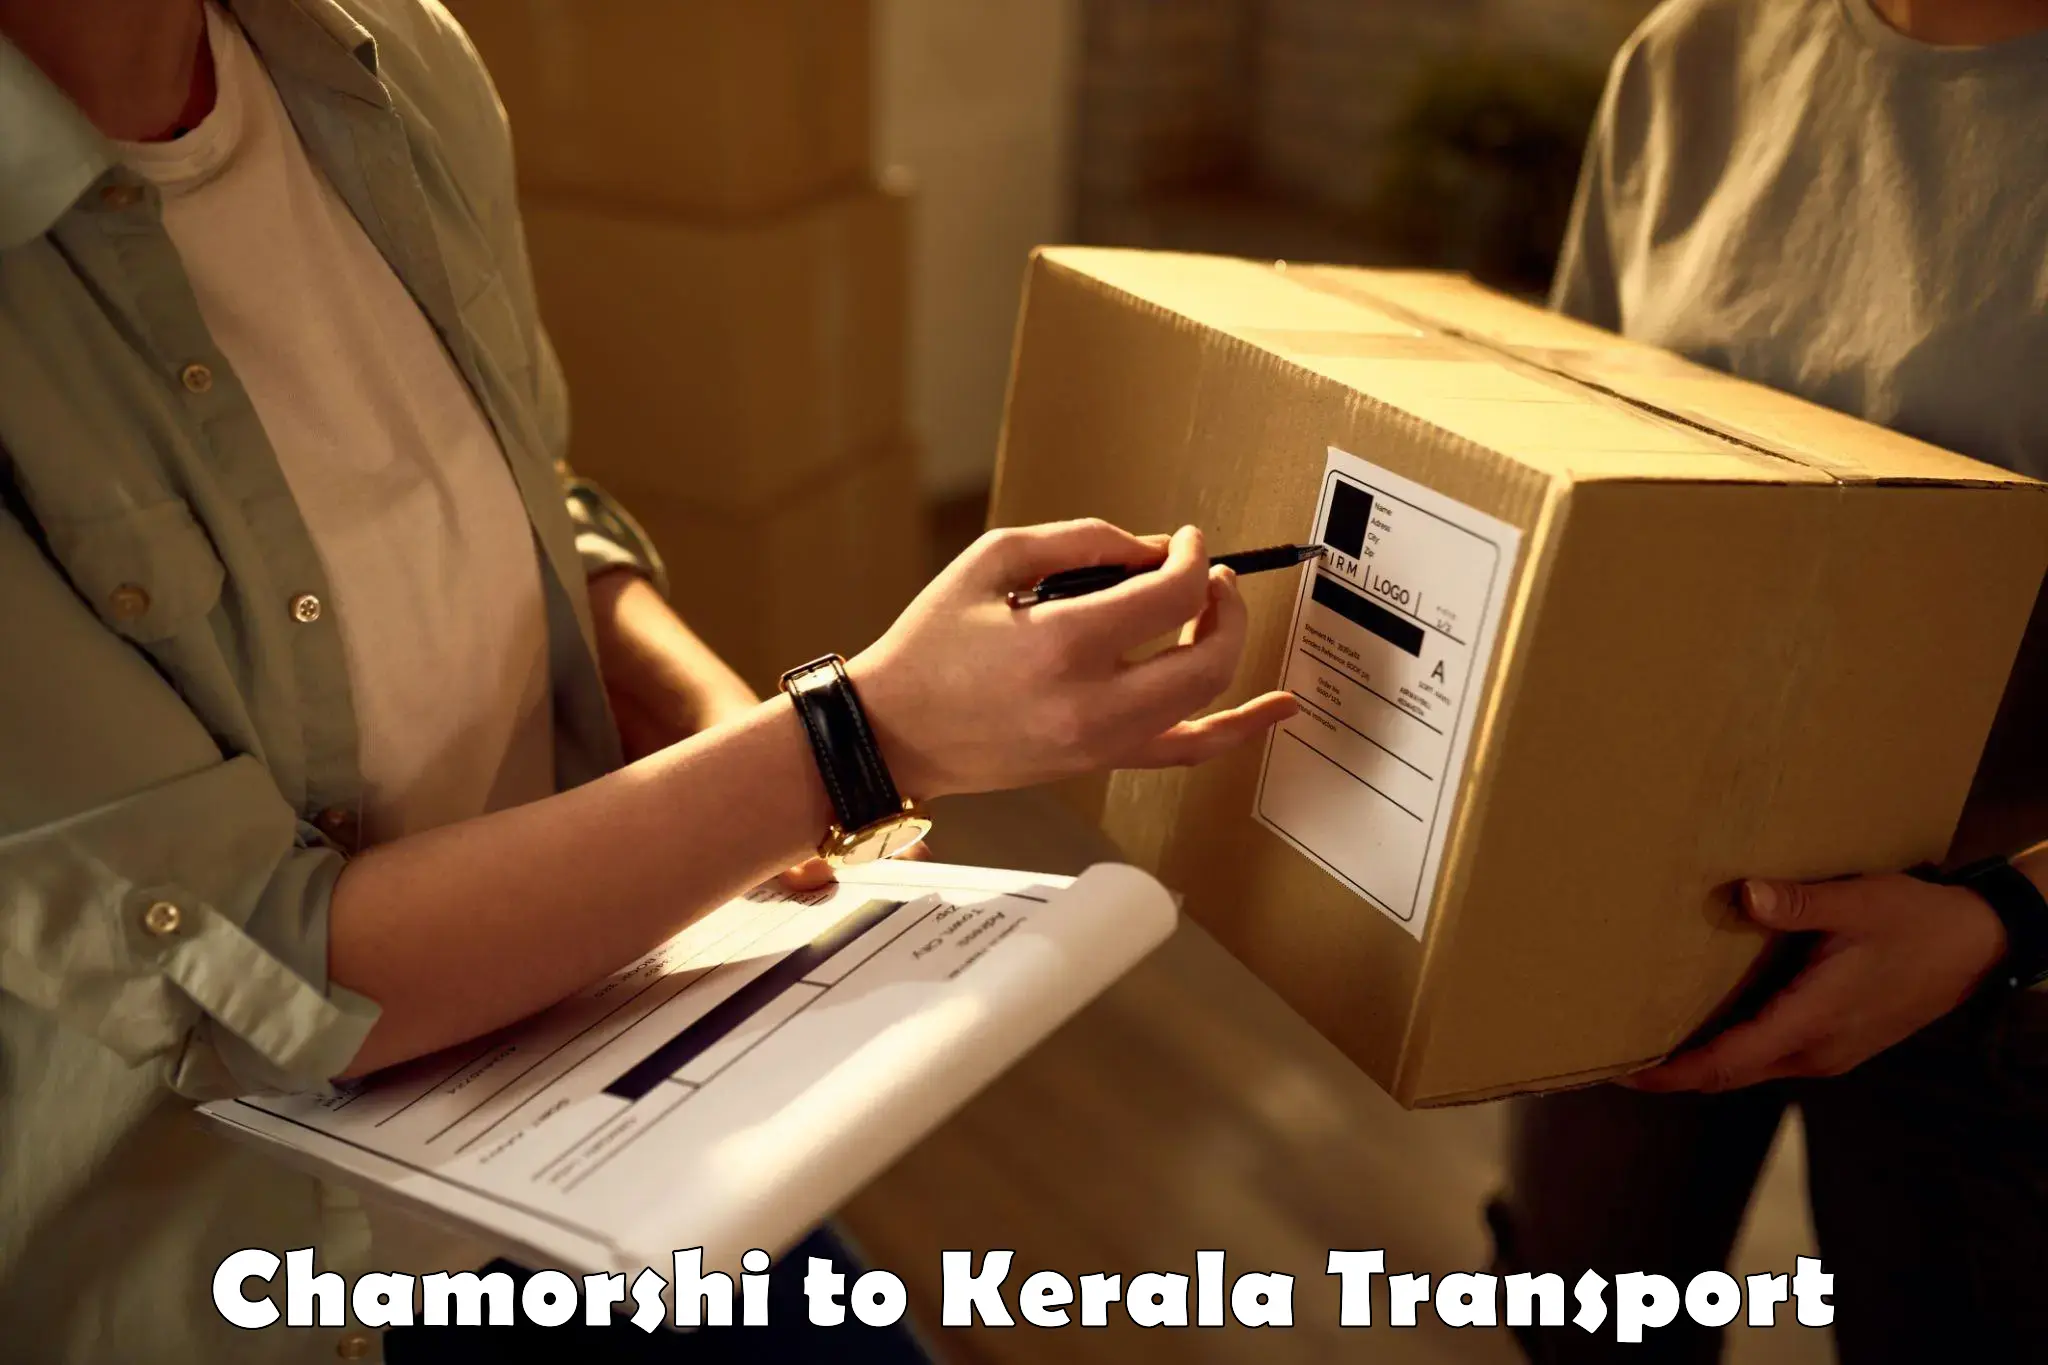 Commercial transport service Chamorshi to Rajamudy